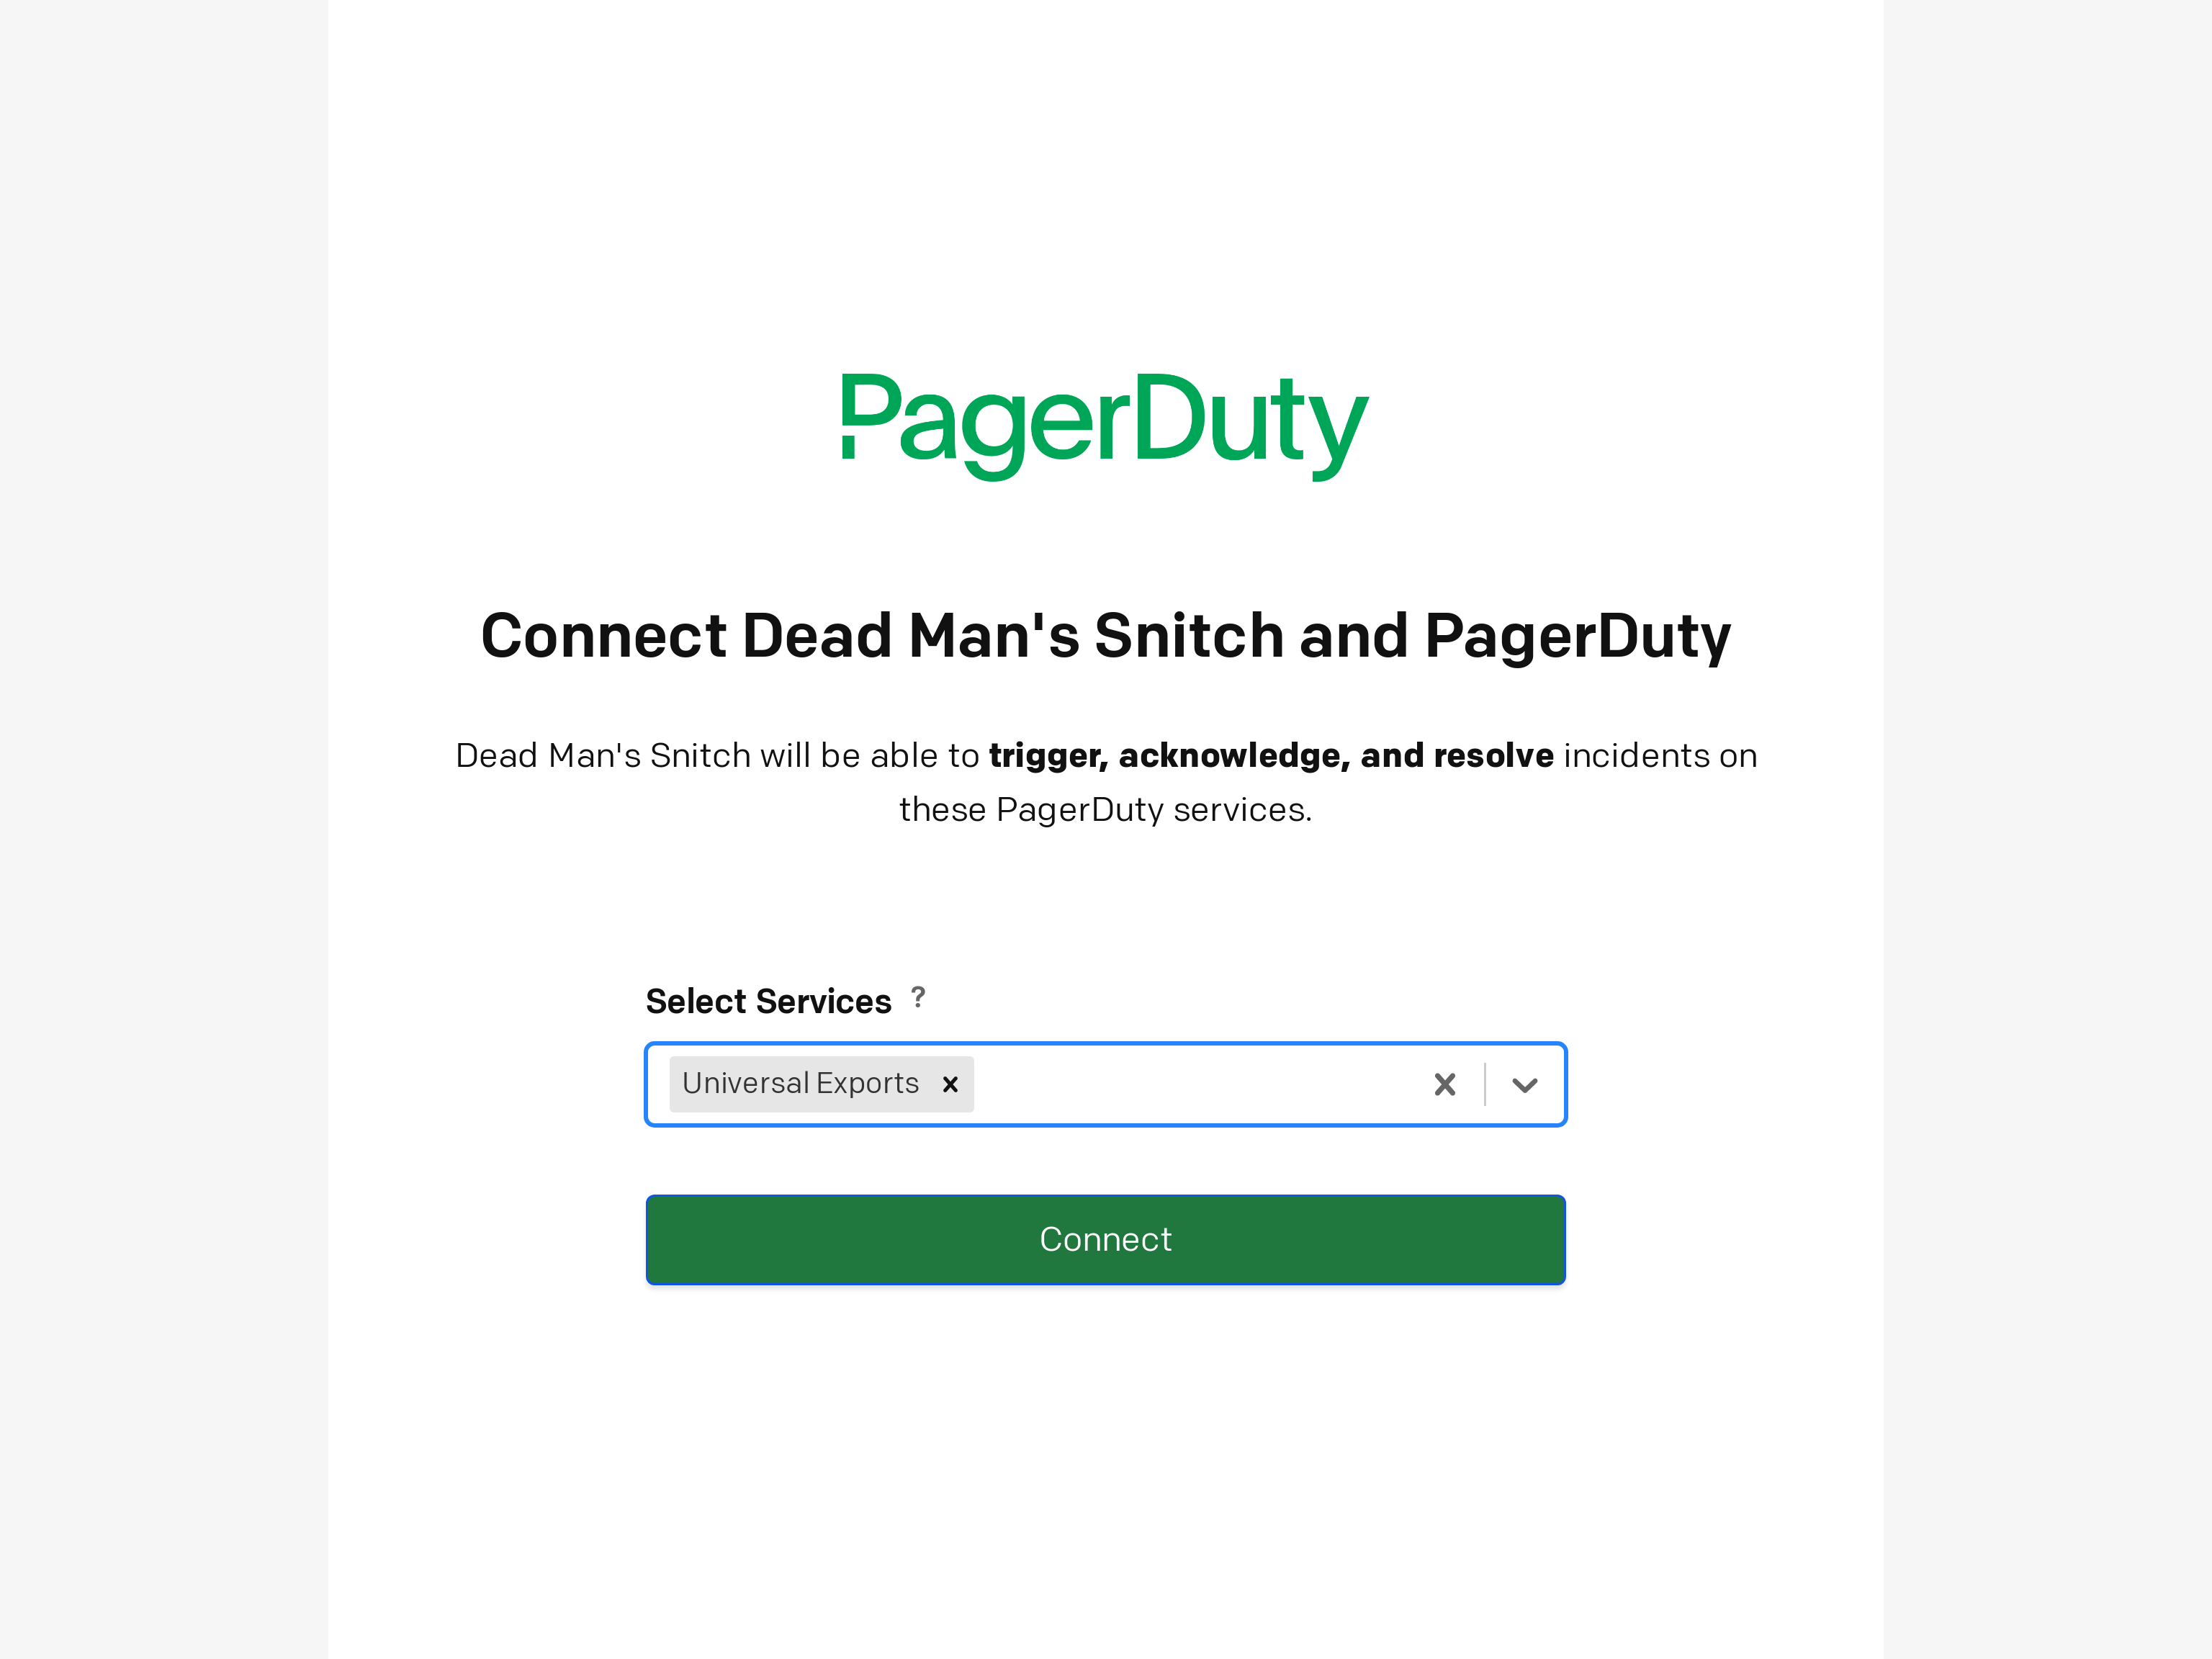 PagerDuty service selection with Universal Exports selected